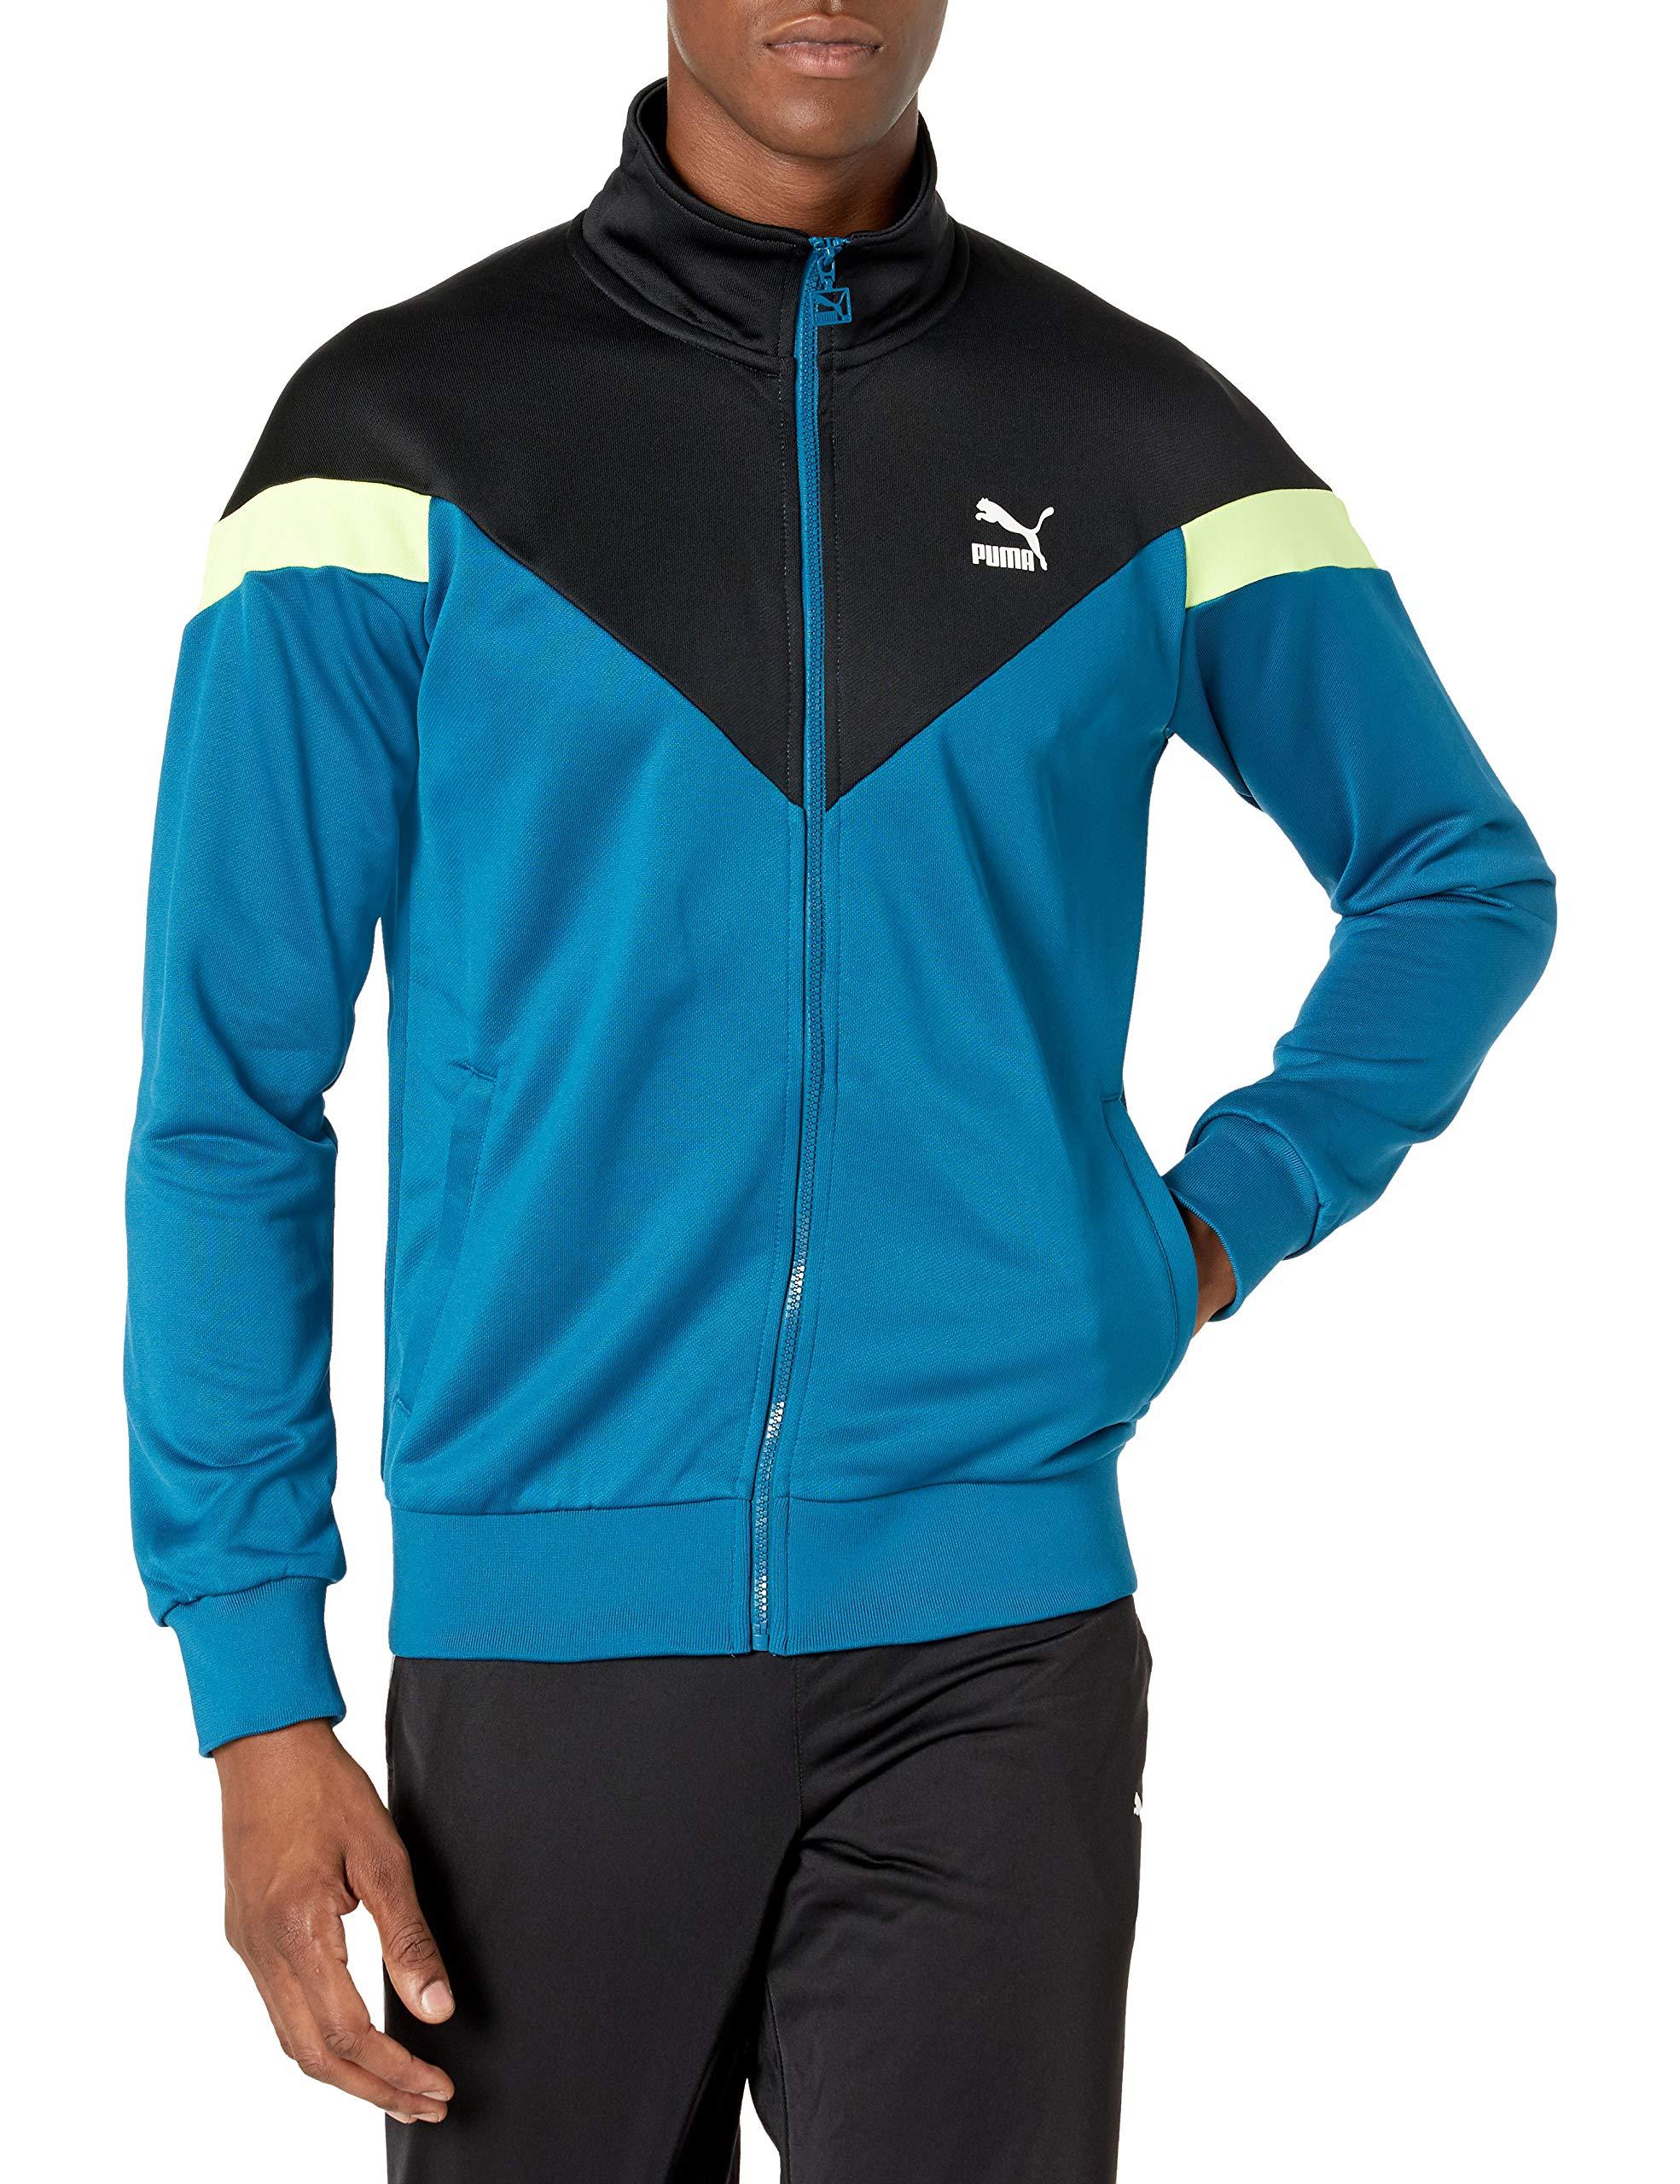 PUMA Cotton Iconic Mcs Track Jacket in Blue for Men - Lyst